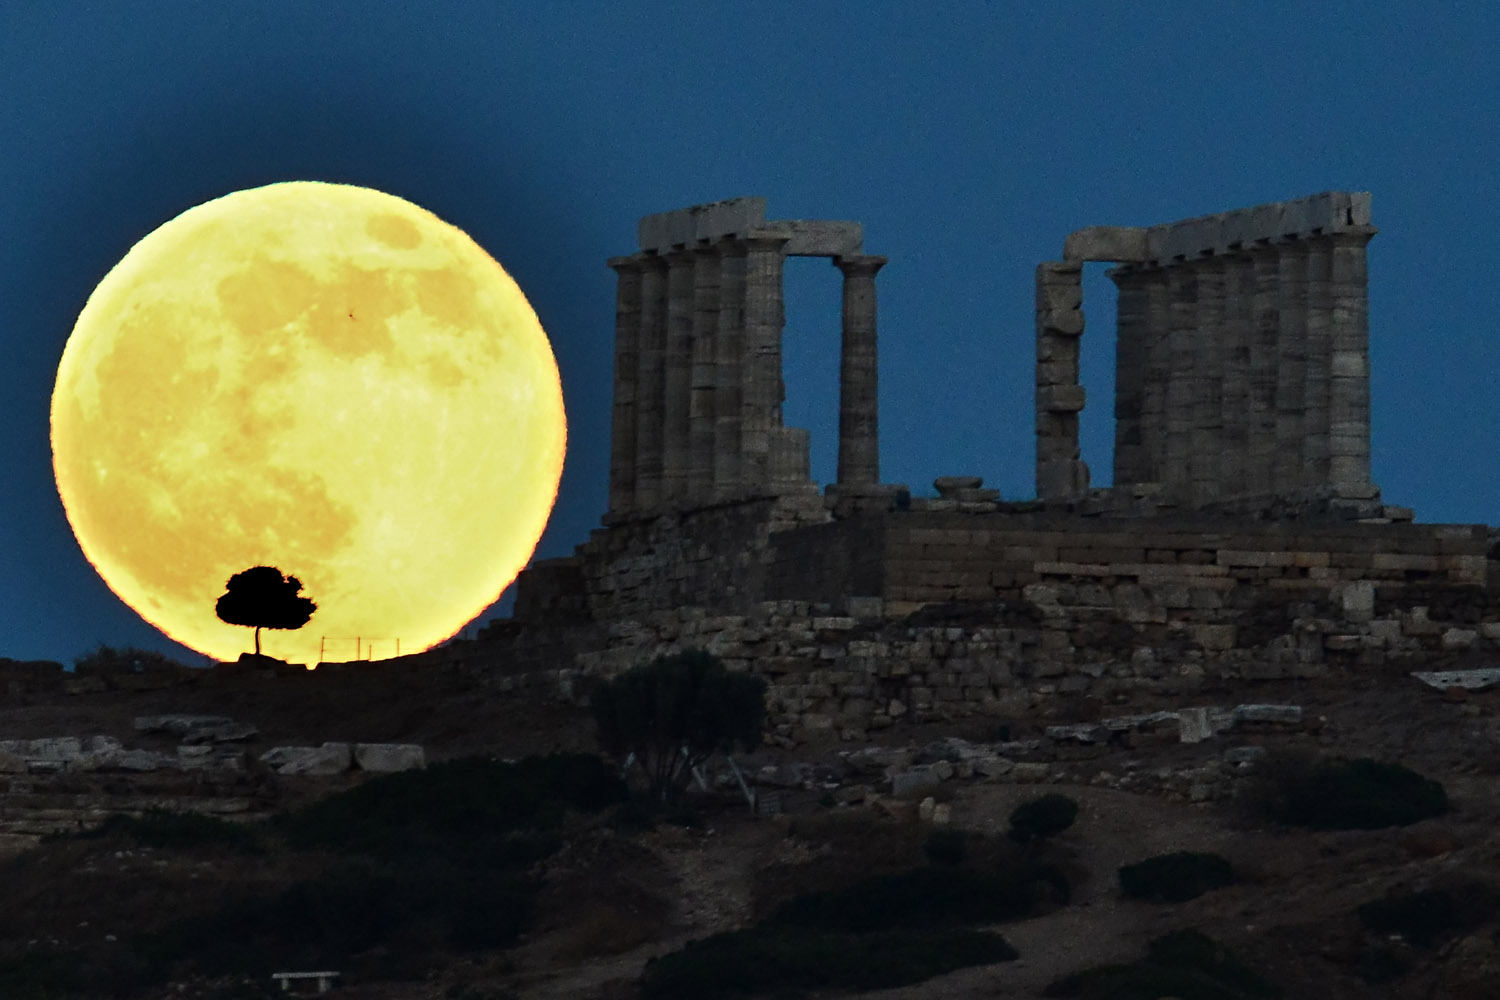 June 23, 2013. A supermoon rises next to the ancient Greek temple of Poseidon at Cape Sounion, Greece.